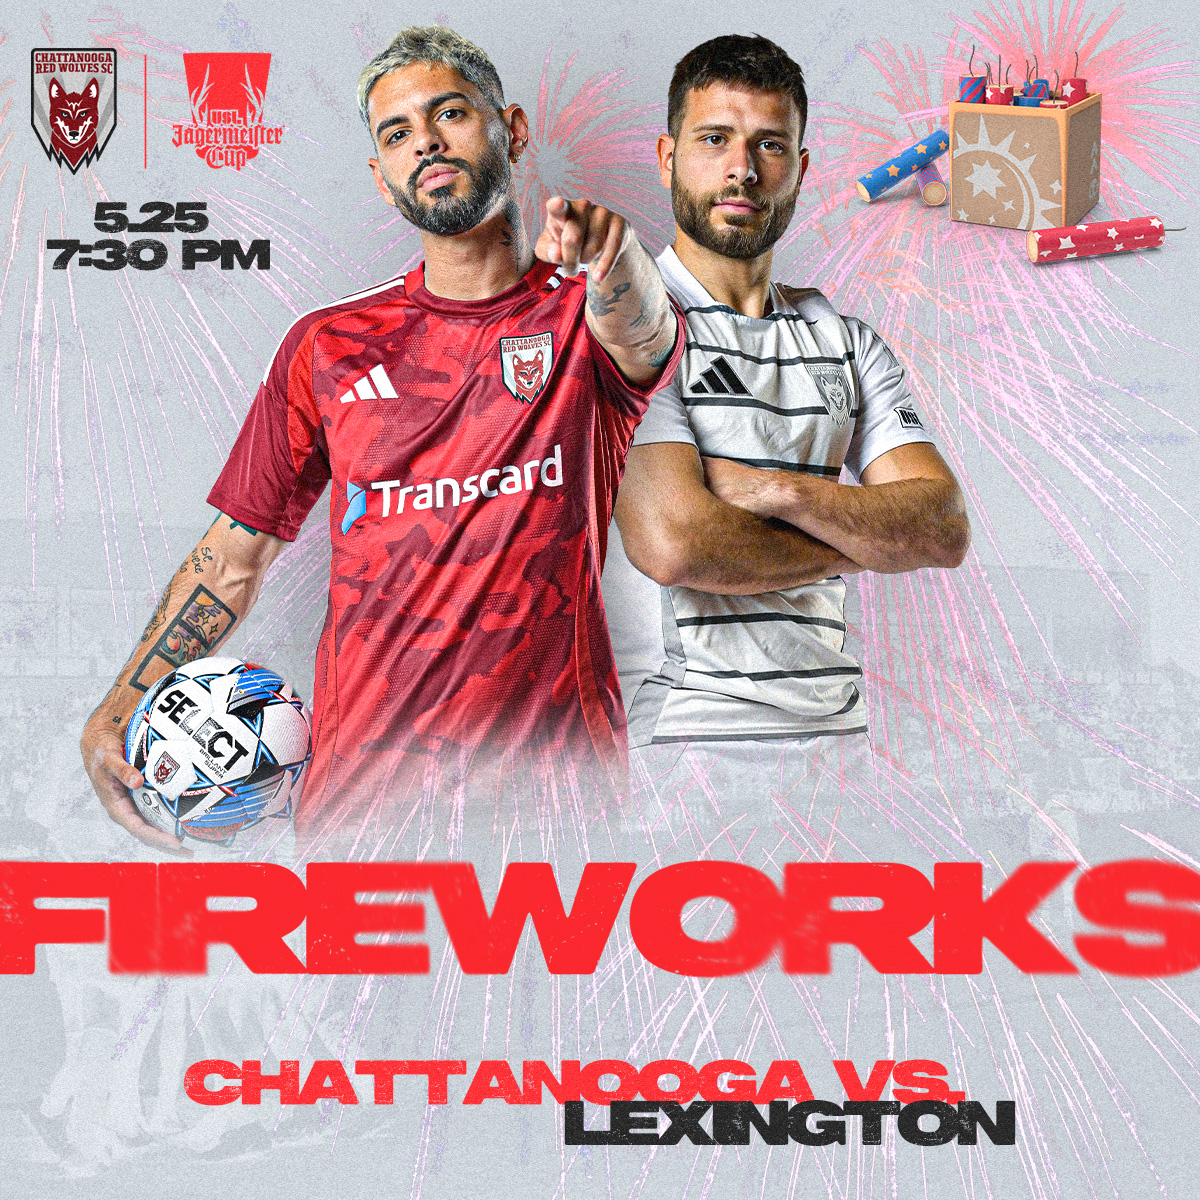 Fireworks are BACK at CHI Memorial Stadium 🎇 Join us for the first post match fireworks show of the season after the final whistle on Saturday, May 25th 🧨 Tickets are on sale now 👉 bit.ly/3R8iXkH #DaleLobos 🔴🐺 #DefendTheDen